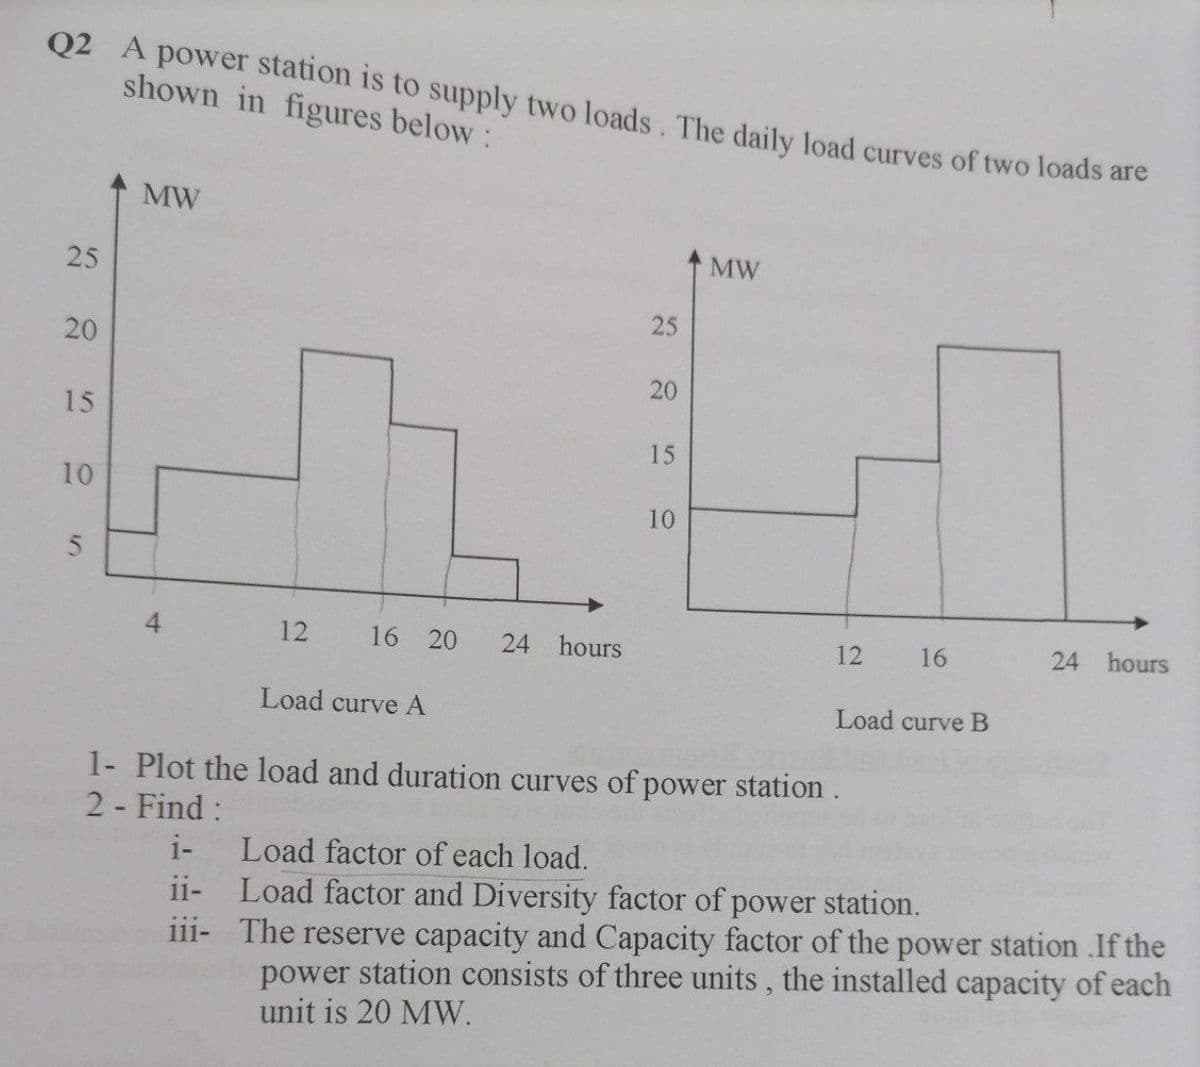 Q2 A power station is to supply two loads. The daily load curves of two loads are
shown in figures below:
MW
MW
25
25
20
20
15
15
10
10
12
16
20
24 hours
12
16
24 hours
Load curve A
Load curve B
1- Plot the load and duration curves of power station.
2- Find:
i-
Load factor of each load.
Load factor and Diversity factor of power station.
iii- The reserve capacity and Capacity factor of the power station .If the
power station consists of three units, the installed capacity of each
unit is 20 MW.
11-
